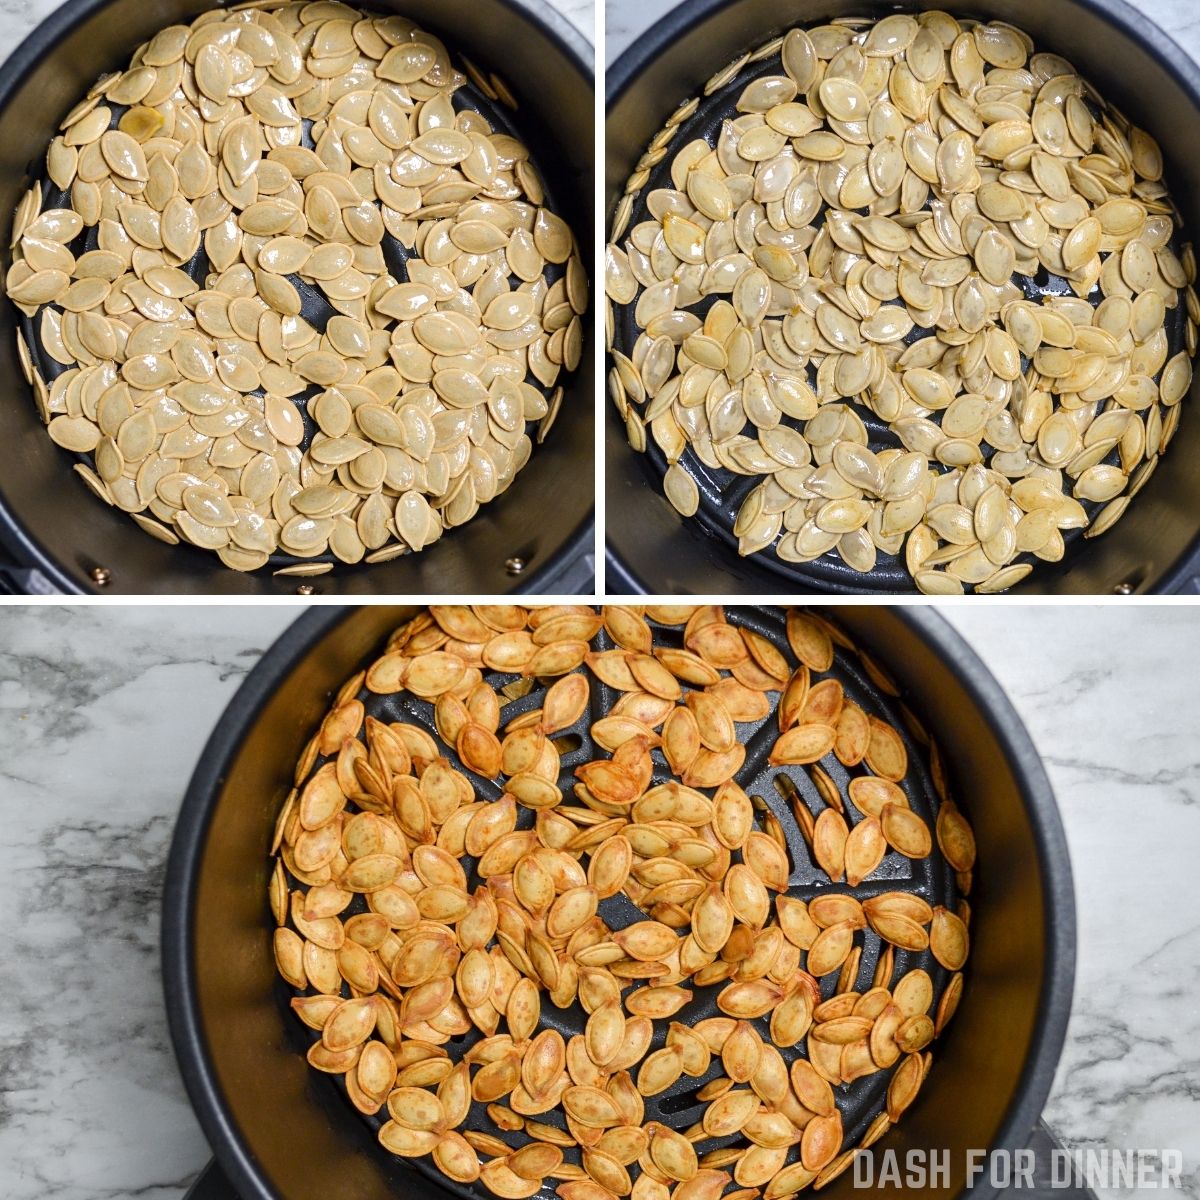 The various stages of roasting pumpkin seeds in an air fryer. First, raw pumpkin seeds tossed with avocado oil. Second, cooked half way through, and the final image is fully roasted pumpkin seeds.